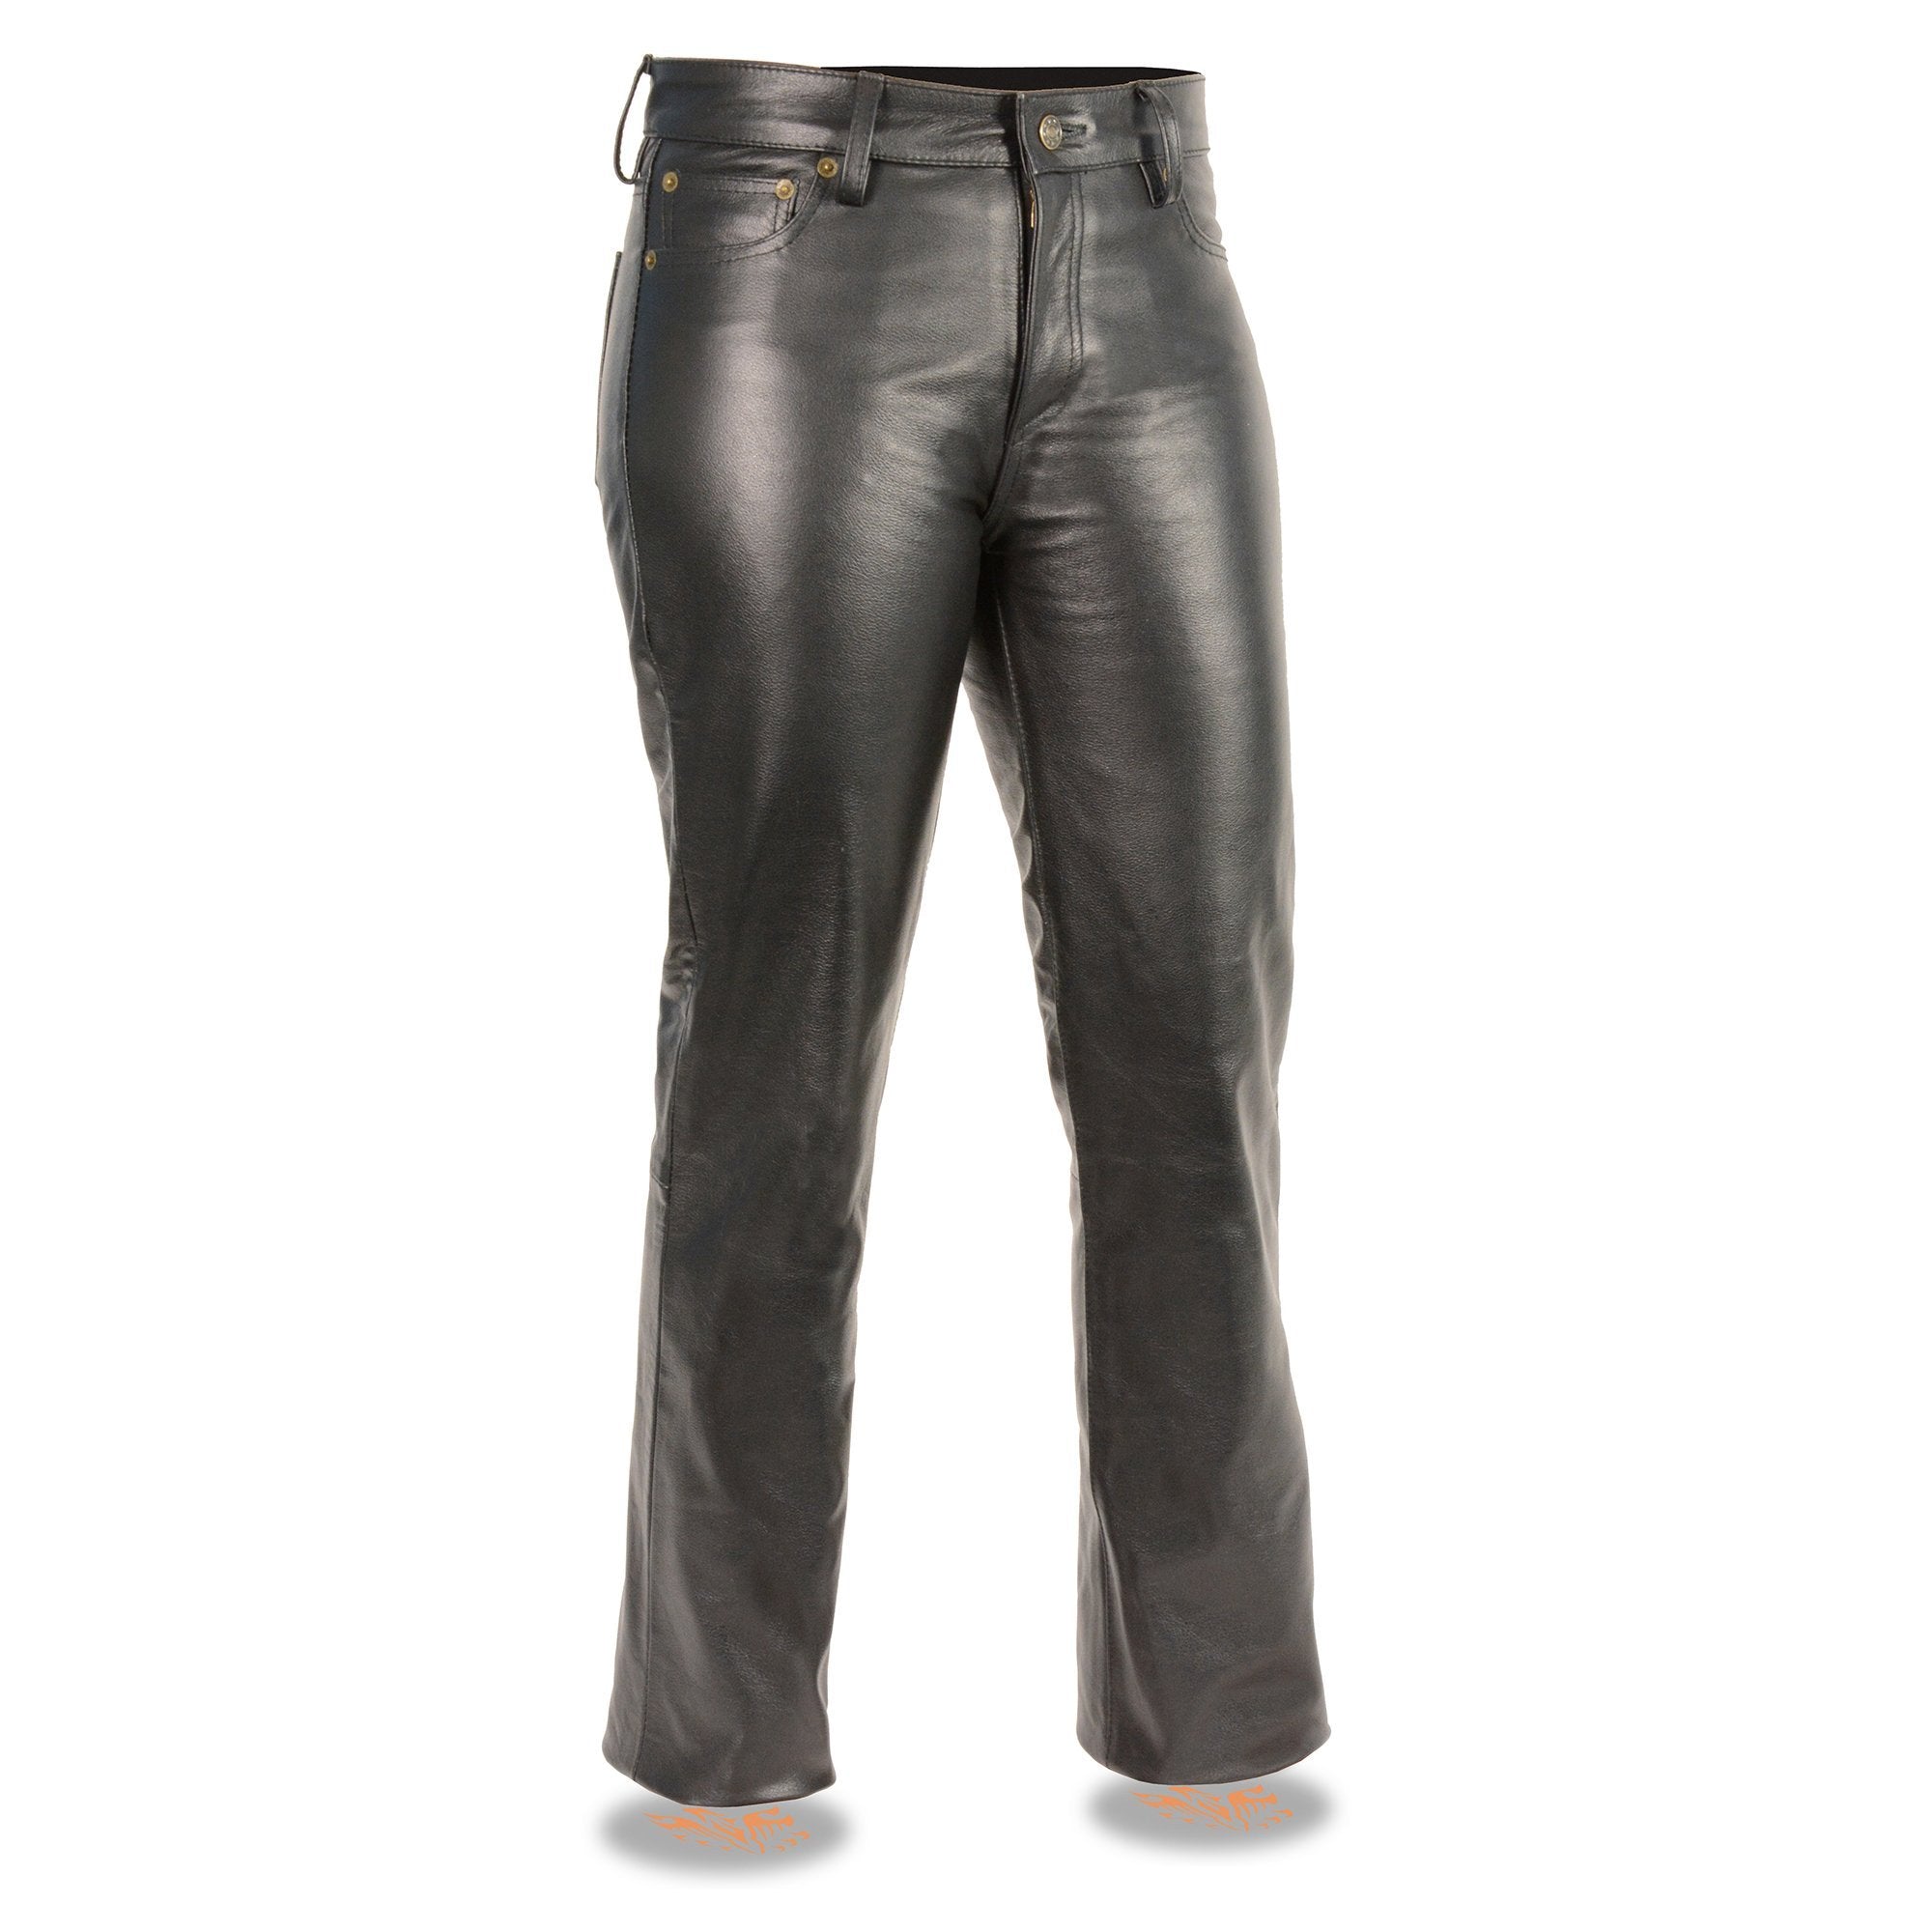 Women's Lambskin Leather Pants That Stretch Like your Favorite Leggings –  Milwaukeee Leather